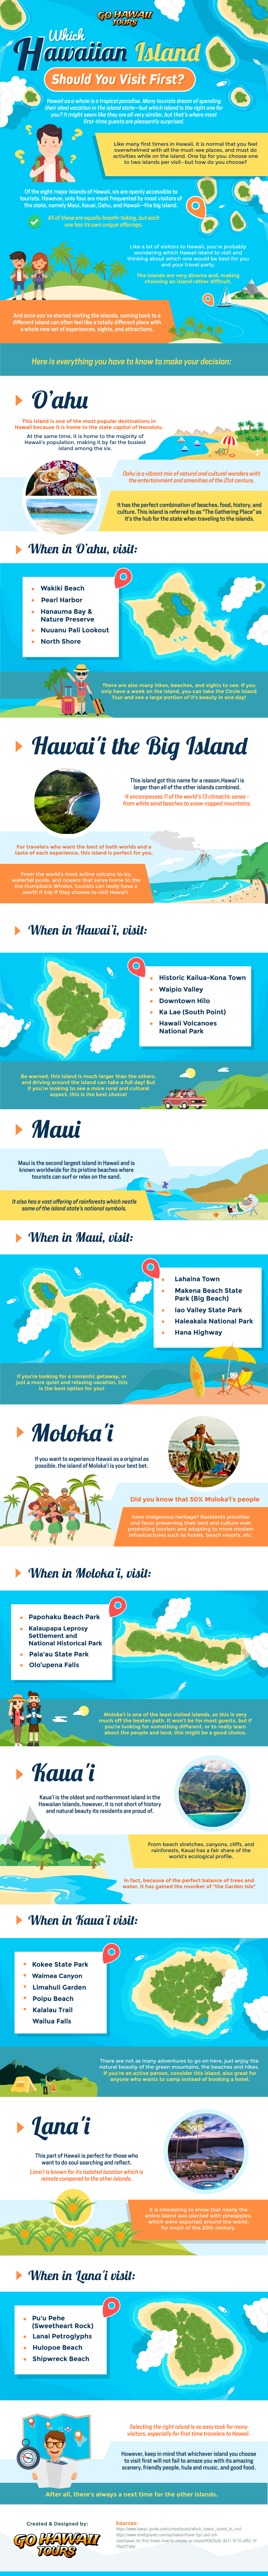 Planning Your Holiday in the Hawaiian Islands - Infographic